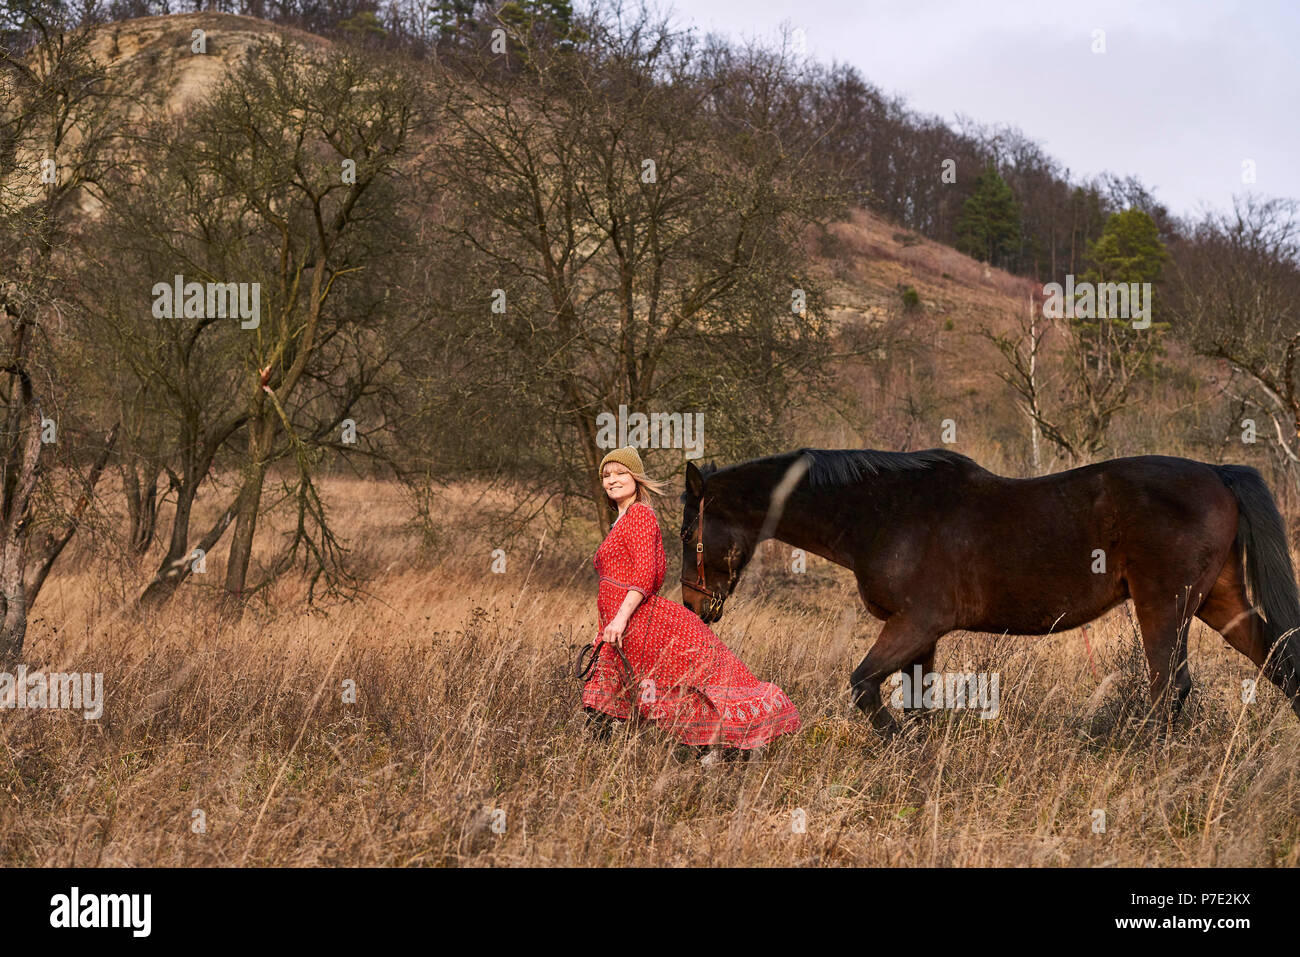 Woman walking with horse Stock Photo